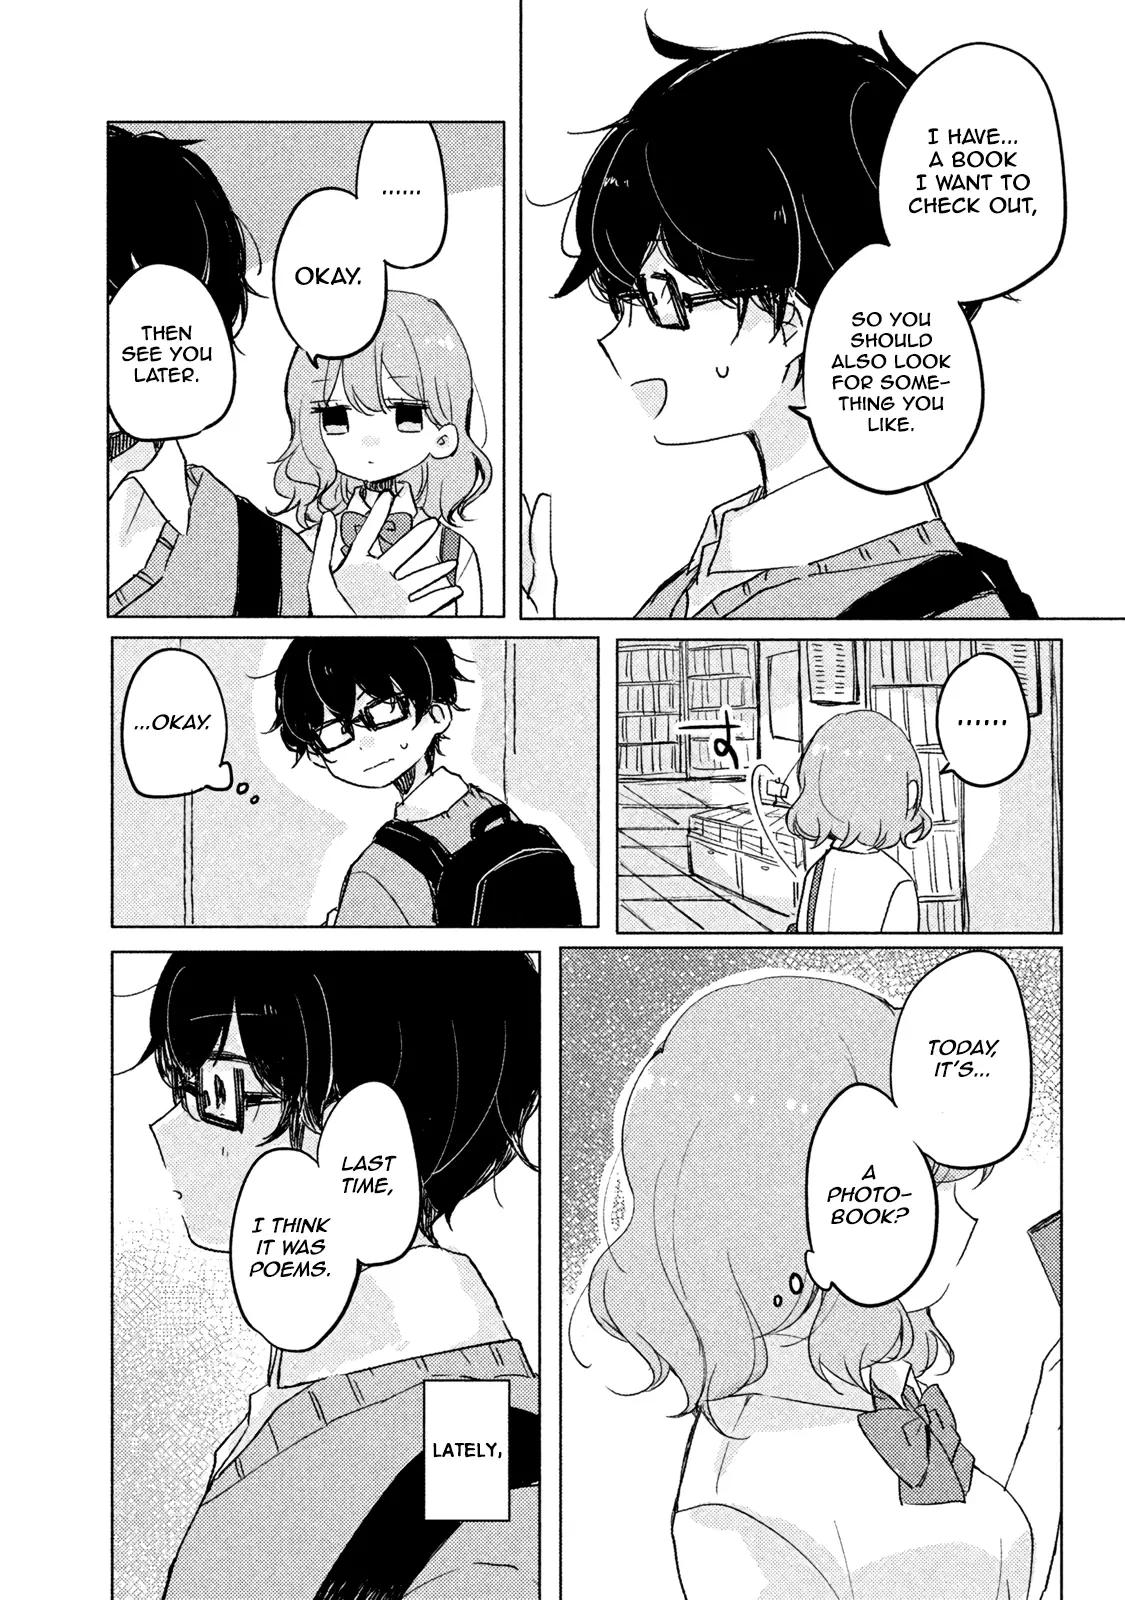 It's Not Meguro-San's First Time - 3 page 2